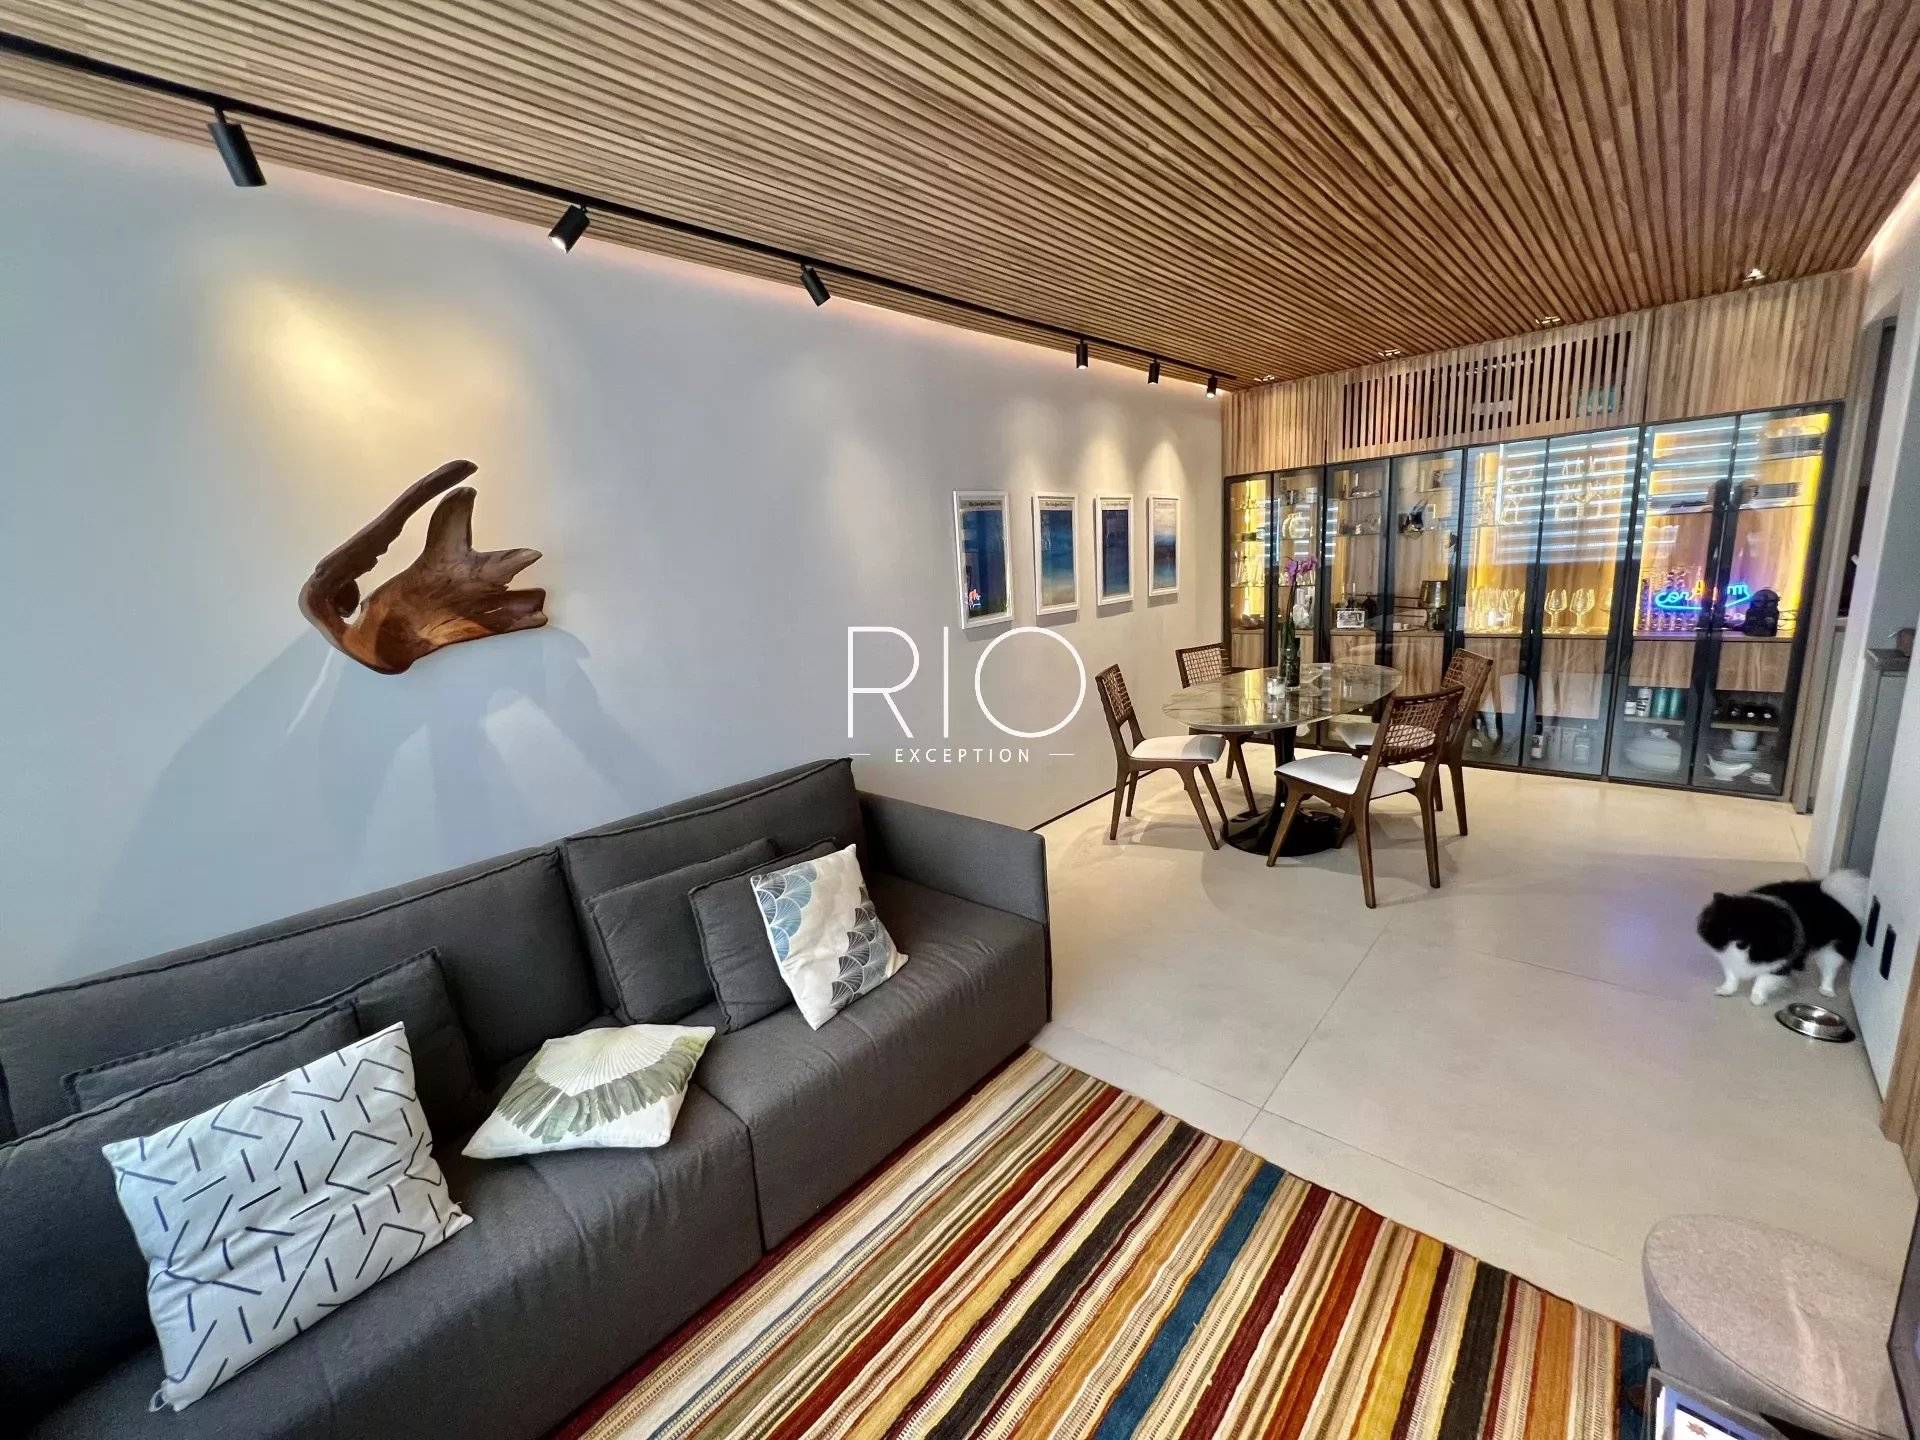 IPANEMA - Beautiful 58m2 apartment sold fully equipped - High-end renovation !